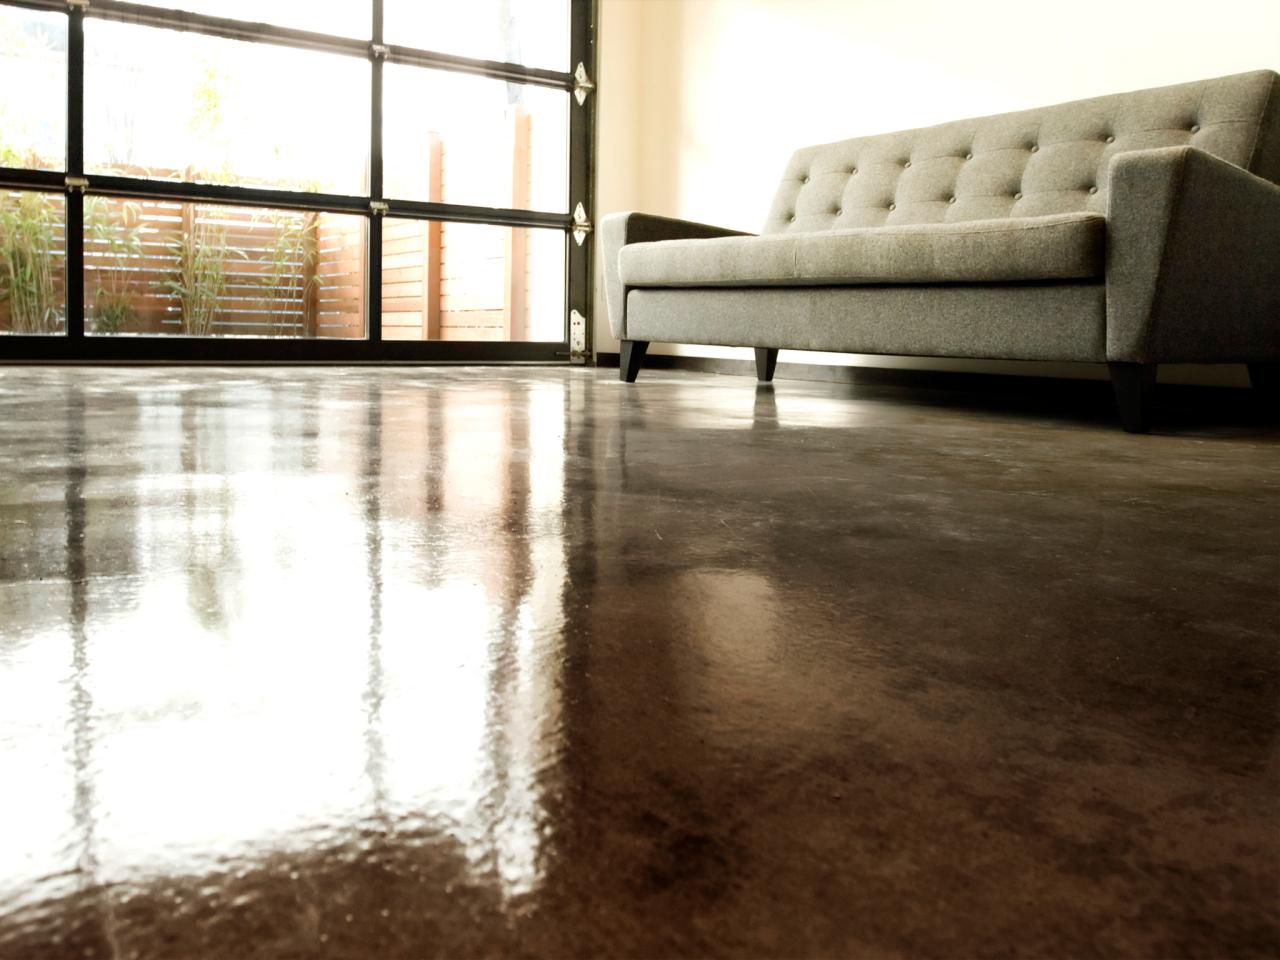 How to Apply an Acid-Stain Look to Concrete Flooring | how-tos | DIY